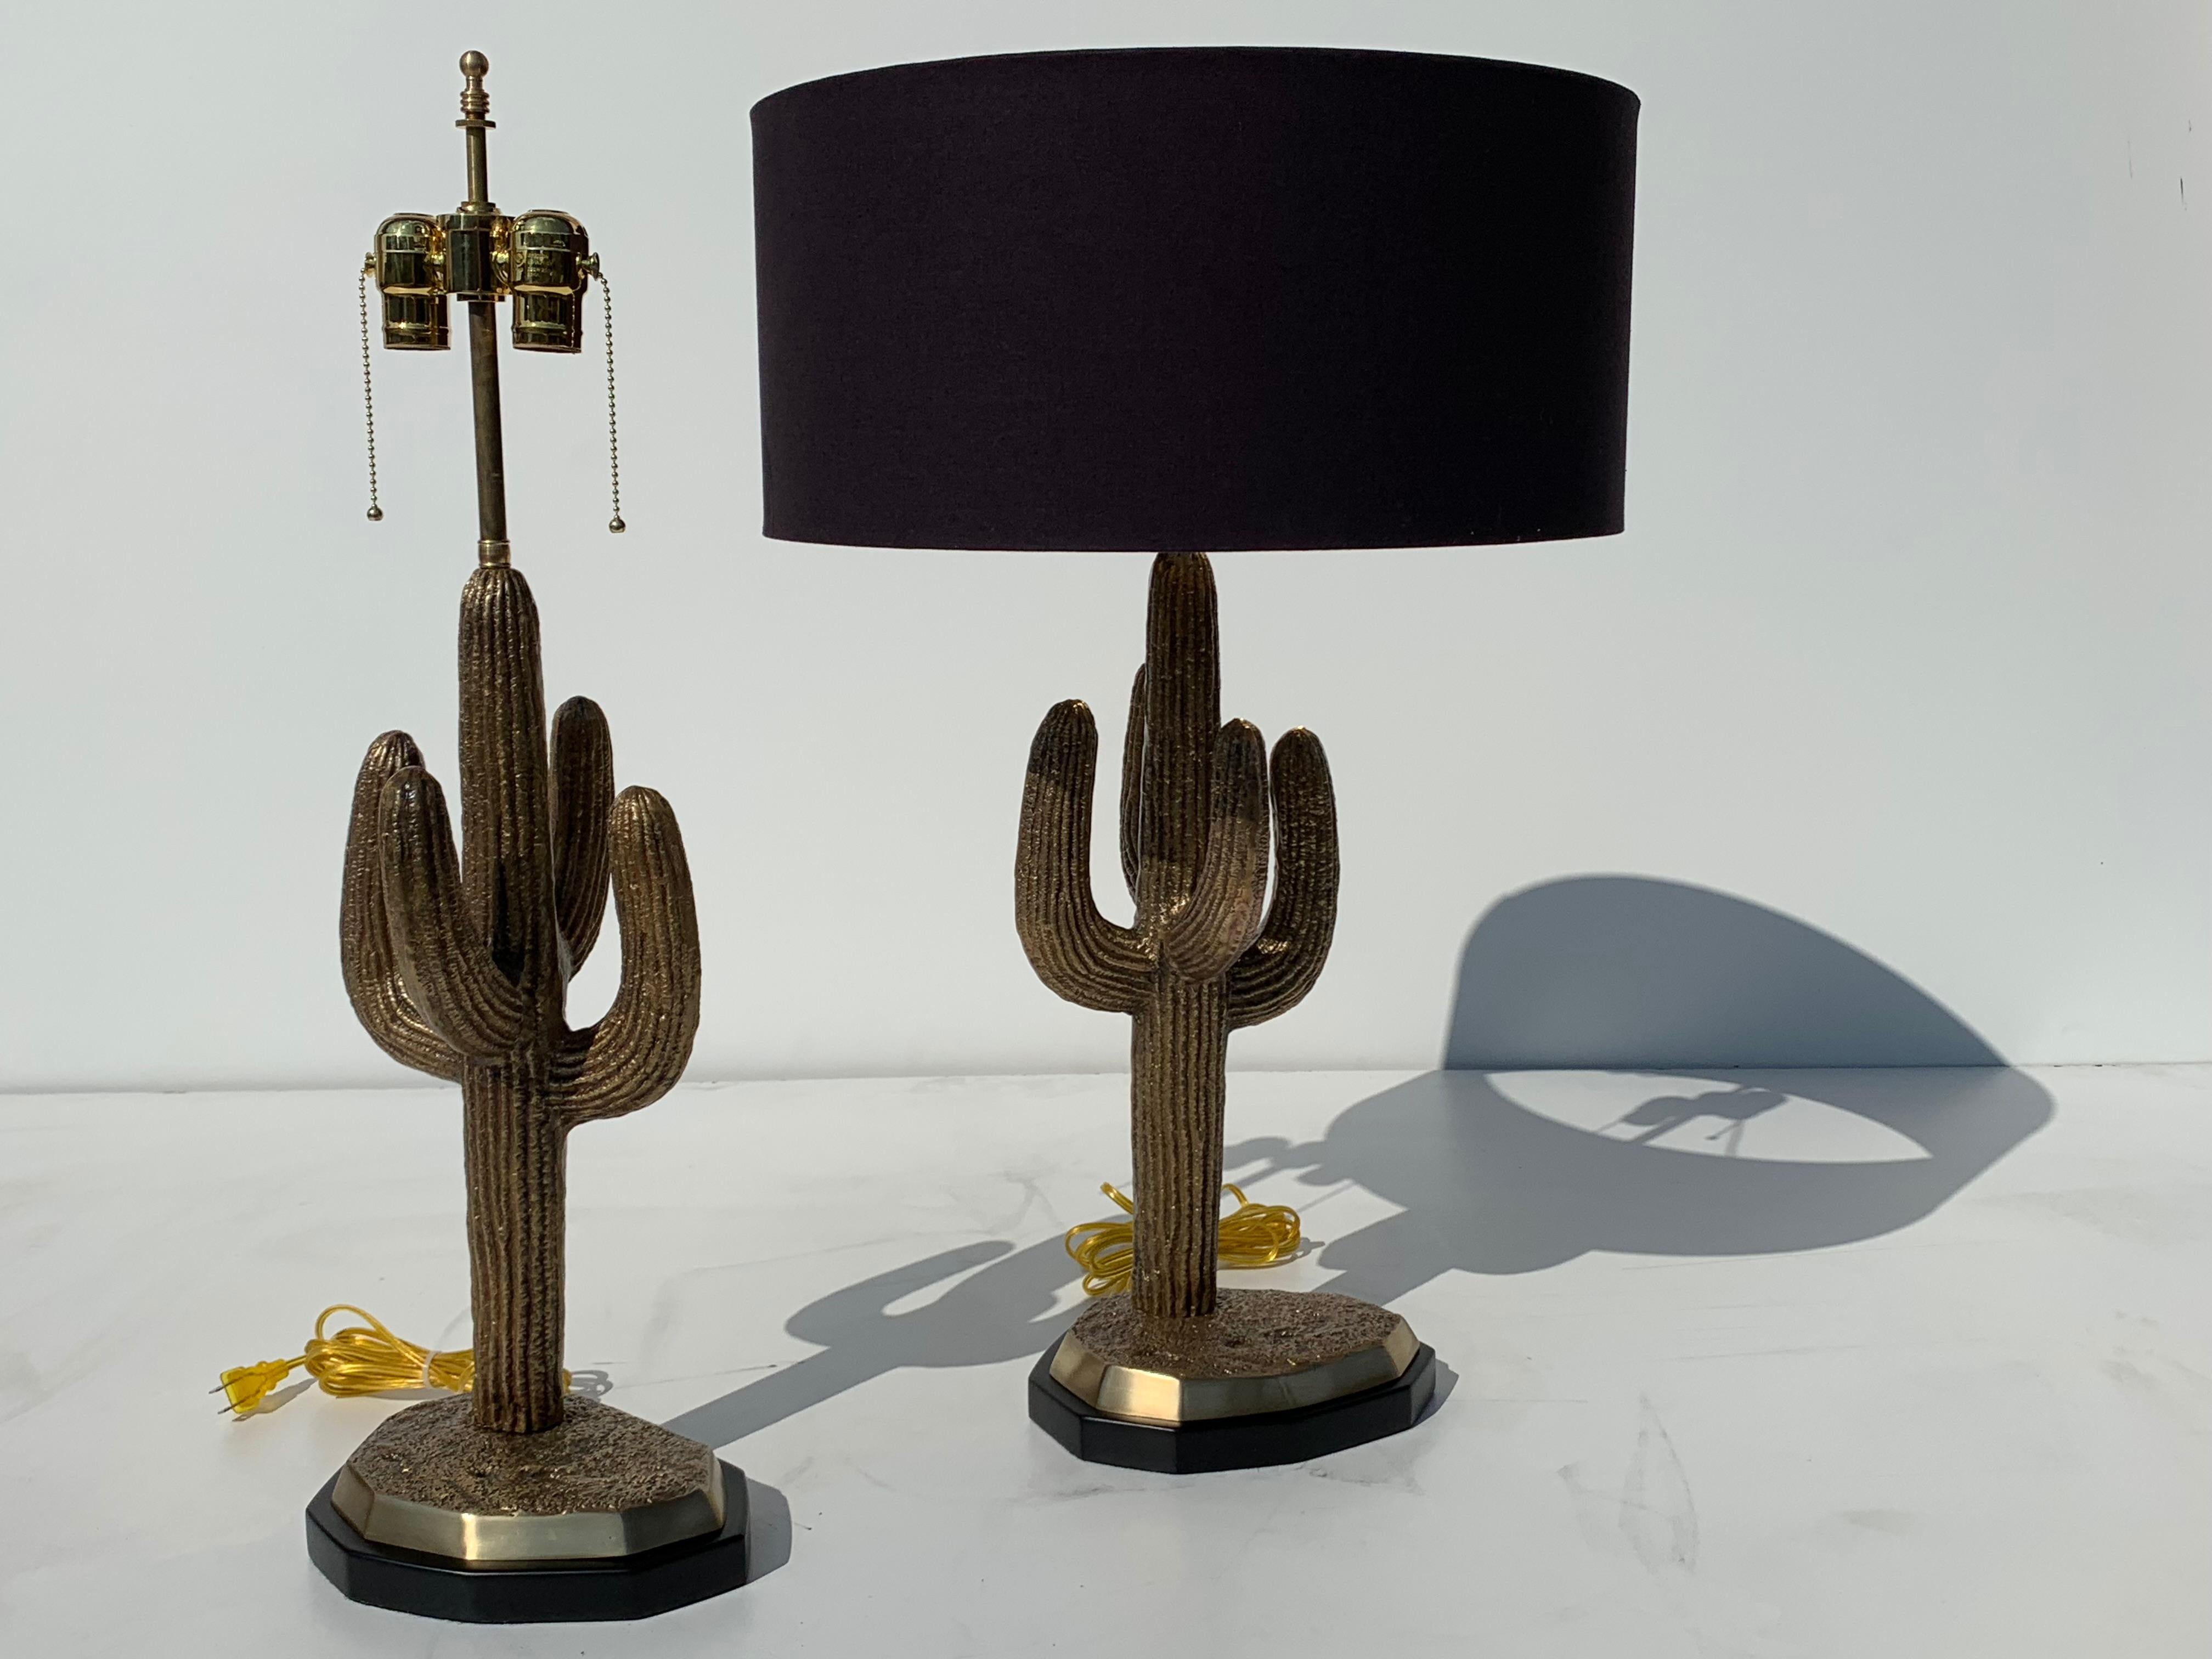 Pair of brass saguaro cactus lamps. Double cluster with max 60watt bulbs. 
Lampshade shown is 18